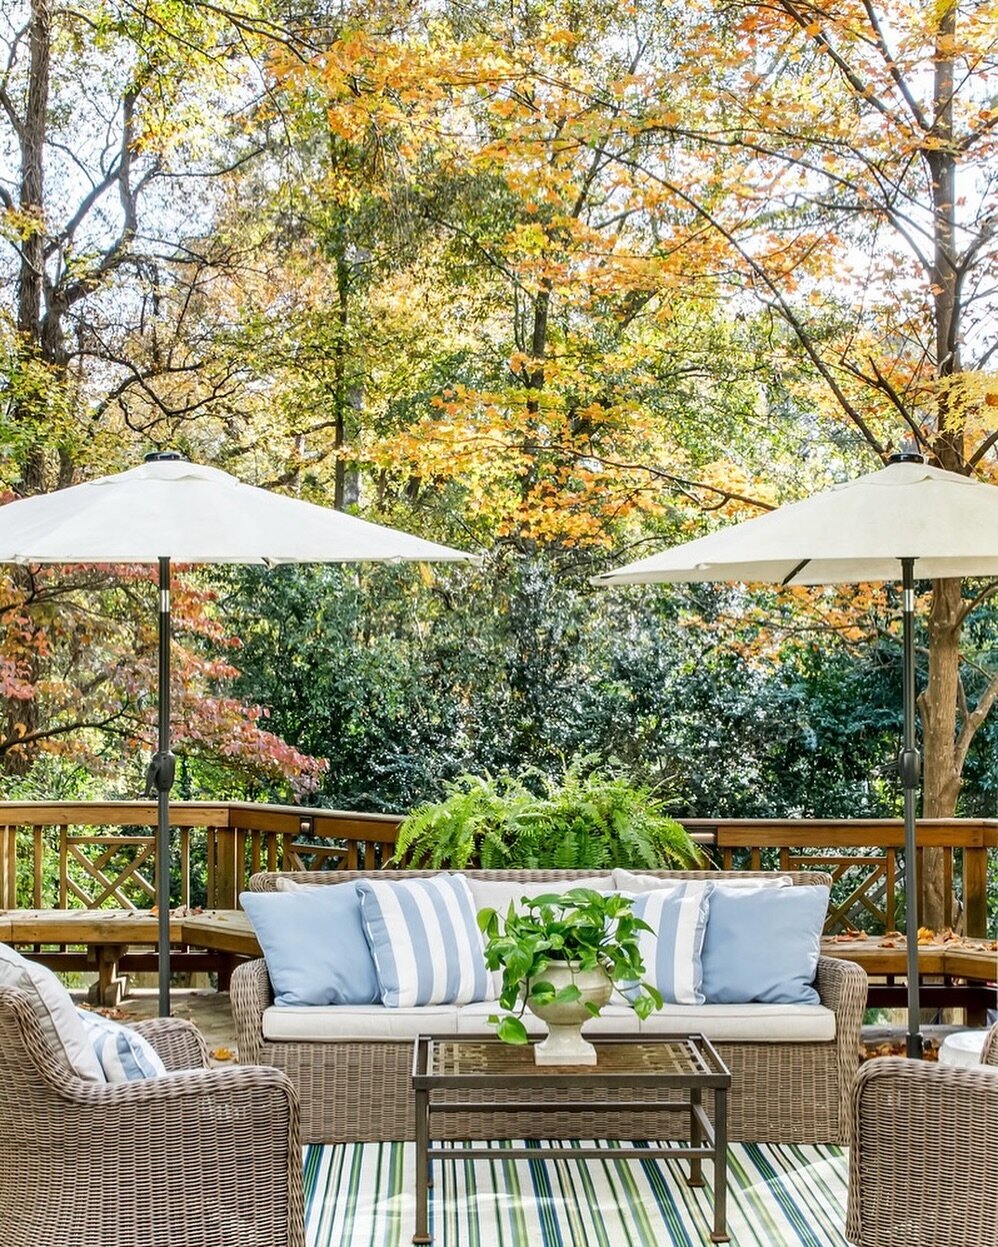 Enjoying this beautiful spring weather as we head into the weekend. 

📷 @laurenchambers_interiorsphoto 
&bull;
&bull;
&bull;
&bull;

#whitneydurhaminteriors #atlantainteriors #atlantainteriordesigner #edesign #edesigner #interiordesign #interiors #i